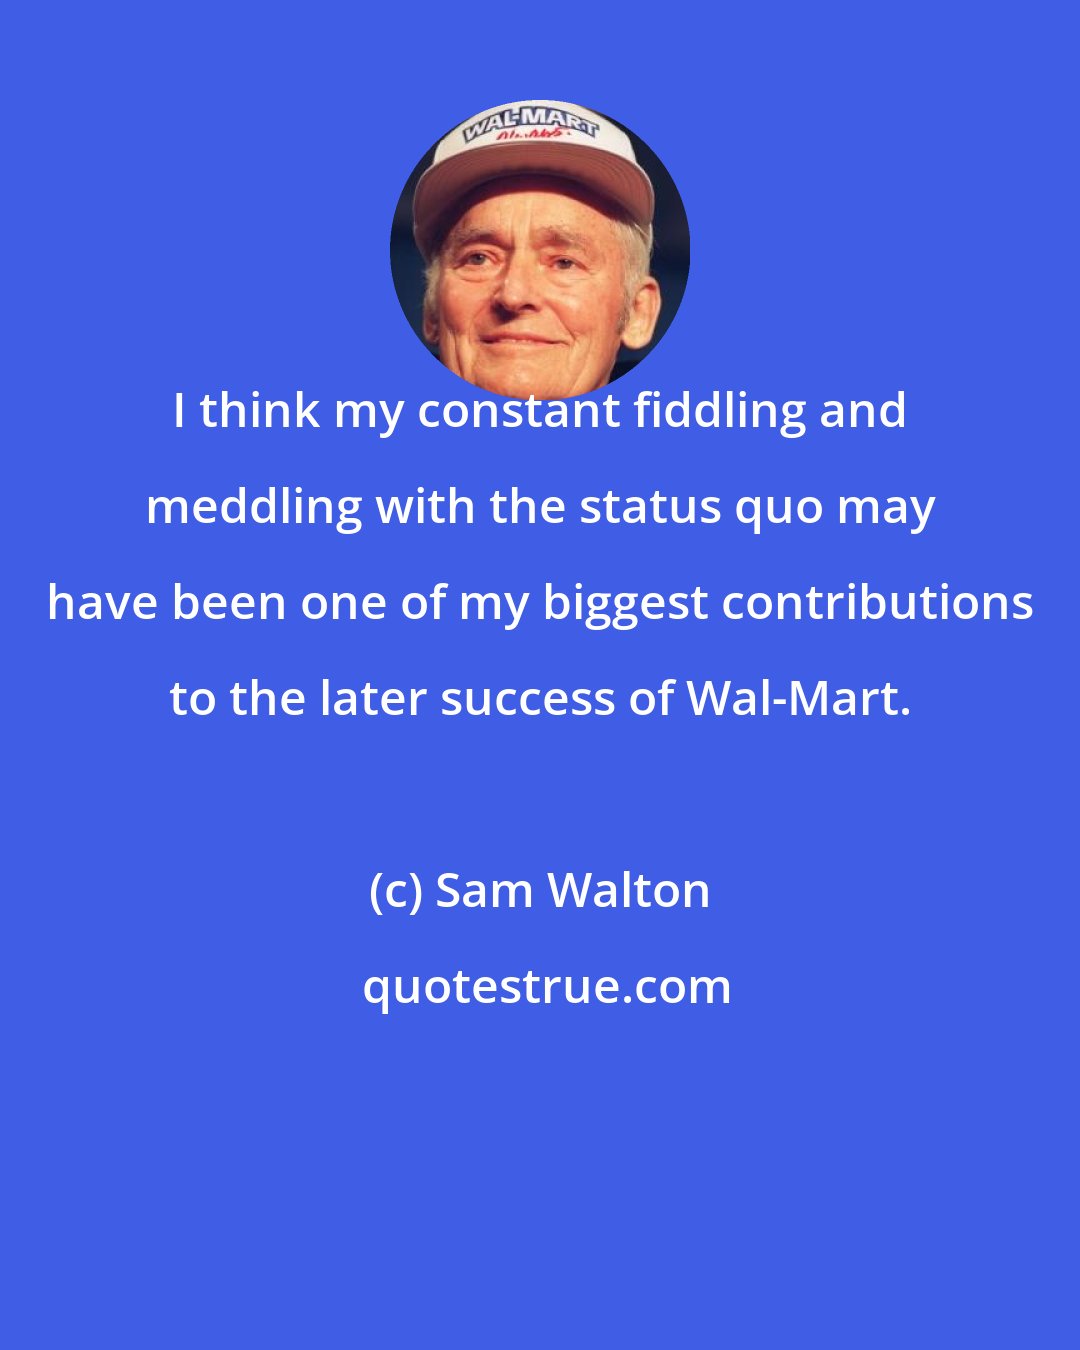 Sam Walton: I think my constant fiddling and meddling with the status quo may have been one of my biggest contributions to the later success of Wal-Mart.